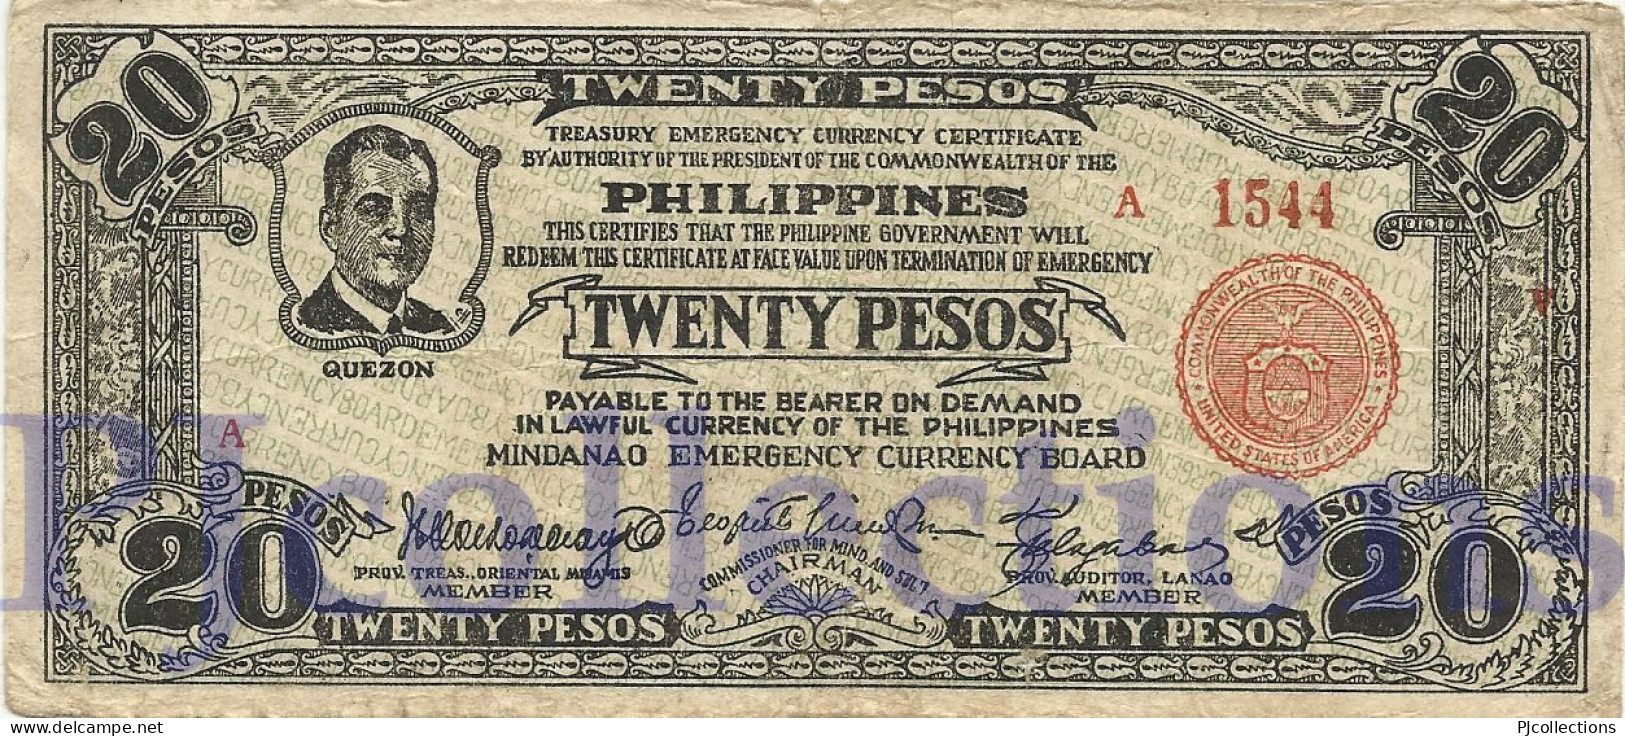 PHILIPPINES 20 PESOS 1942 PICK S474 VF RARE LOW SERIAL NUMBER "A 1544" - Philippines